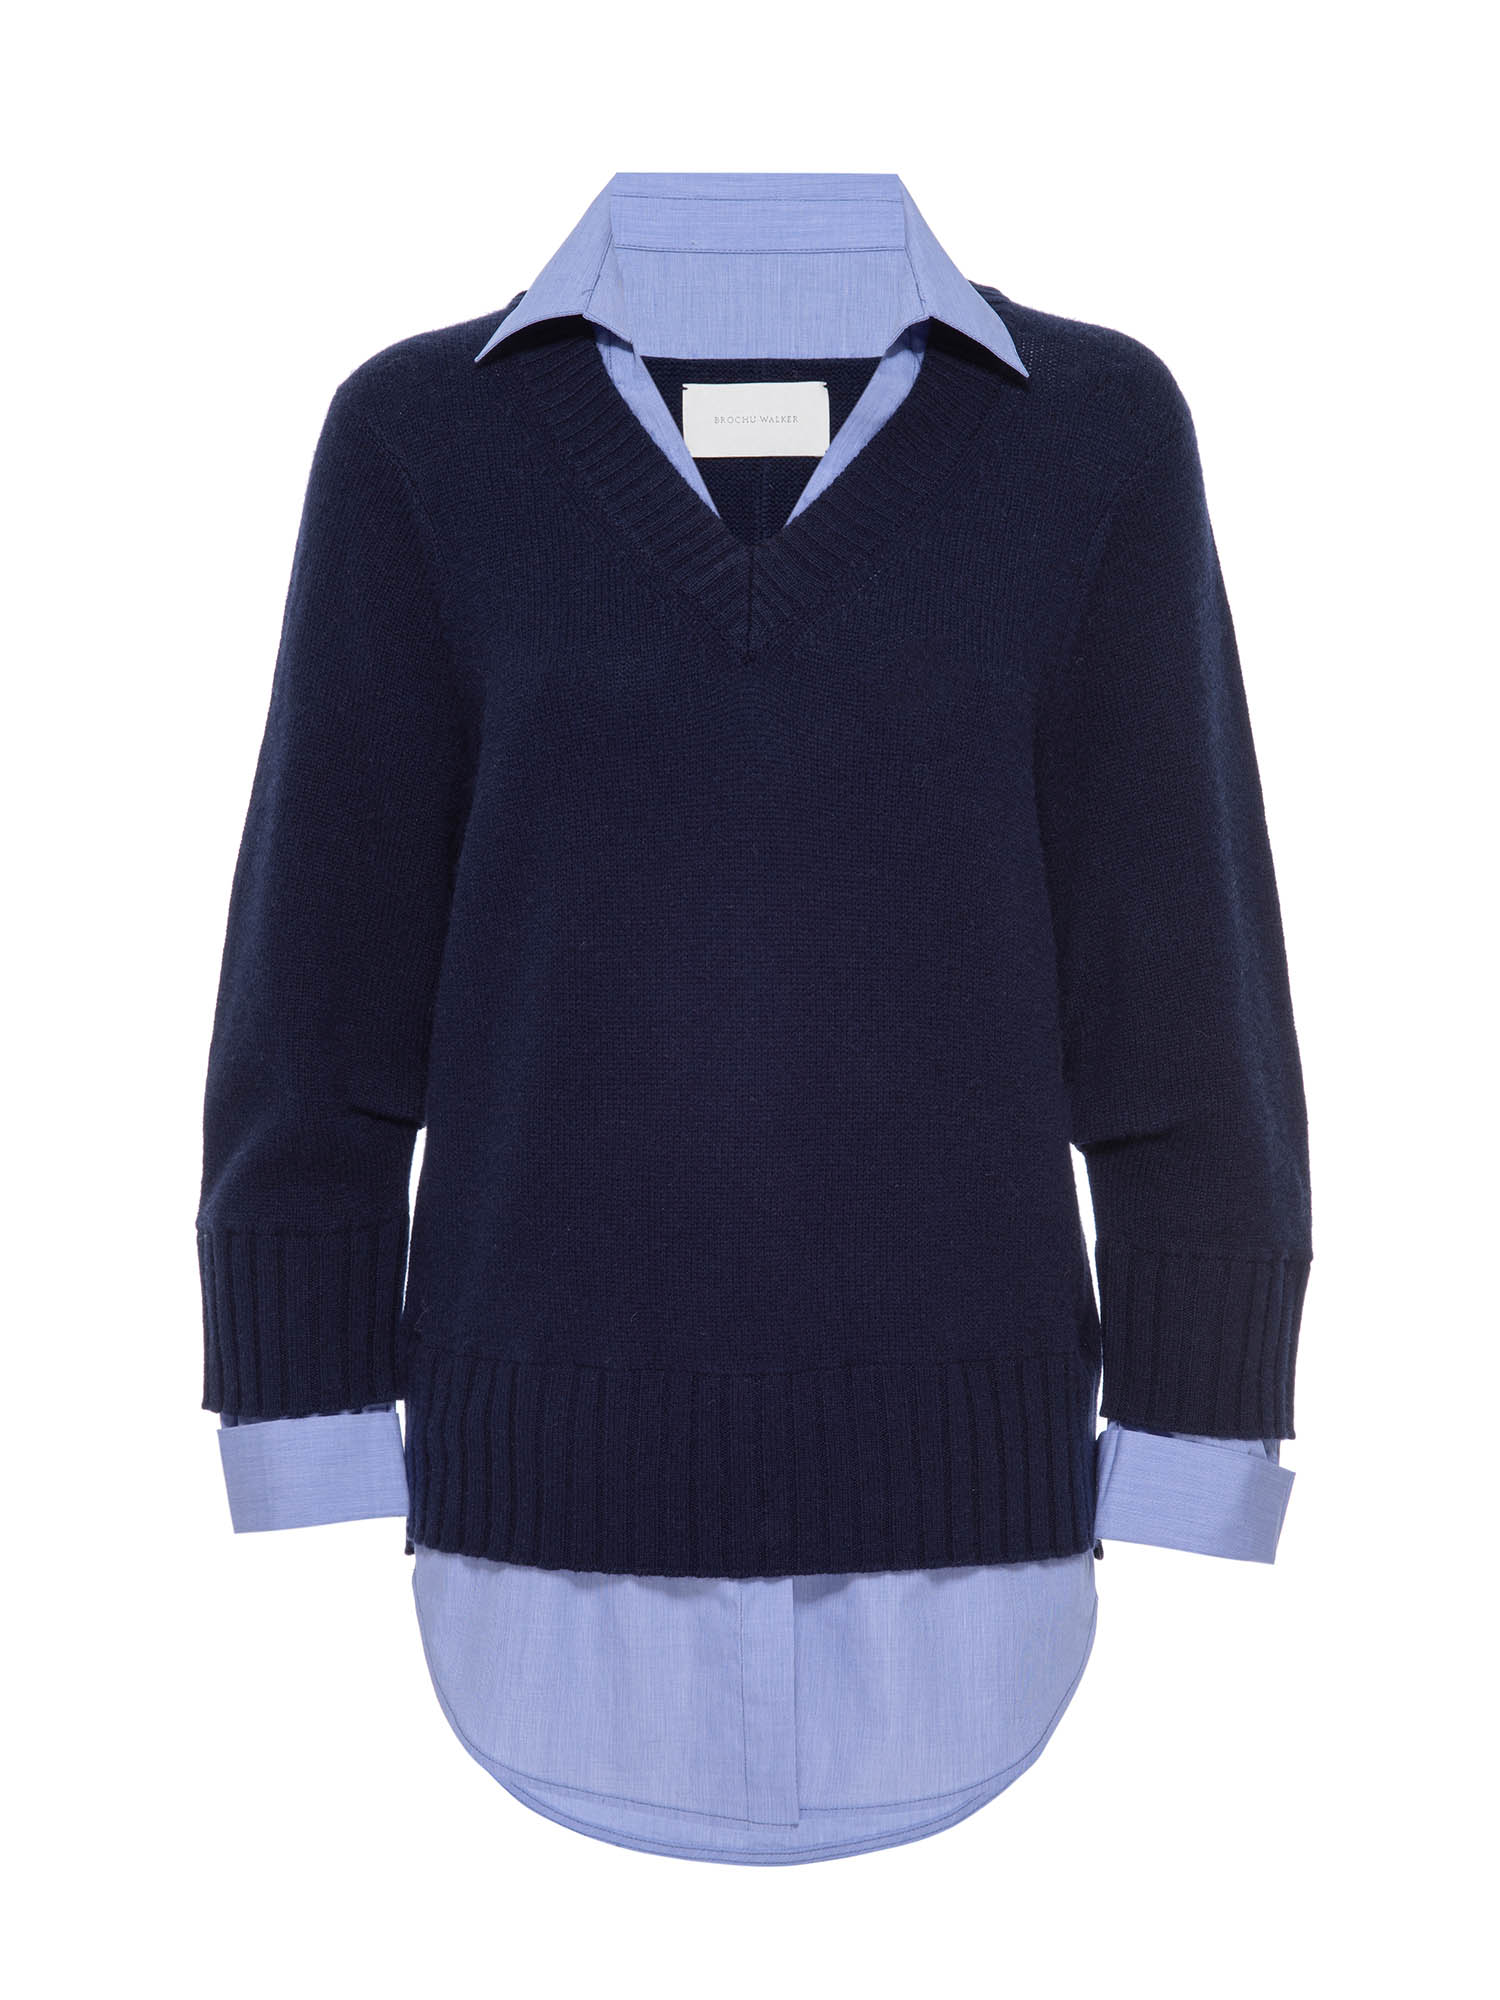 Arden navy blue oxford layered v-neck sweater flat view